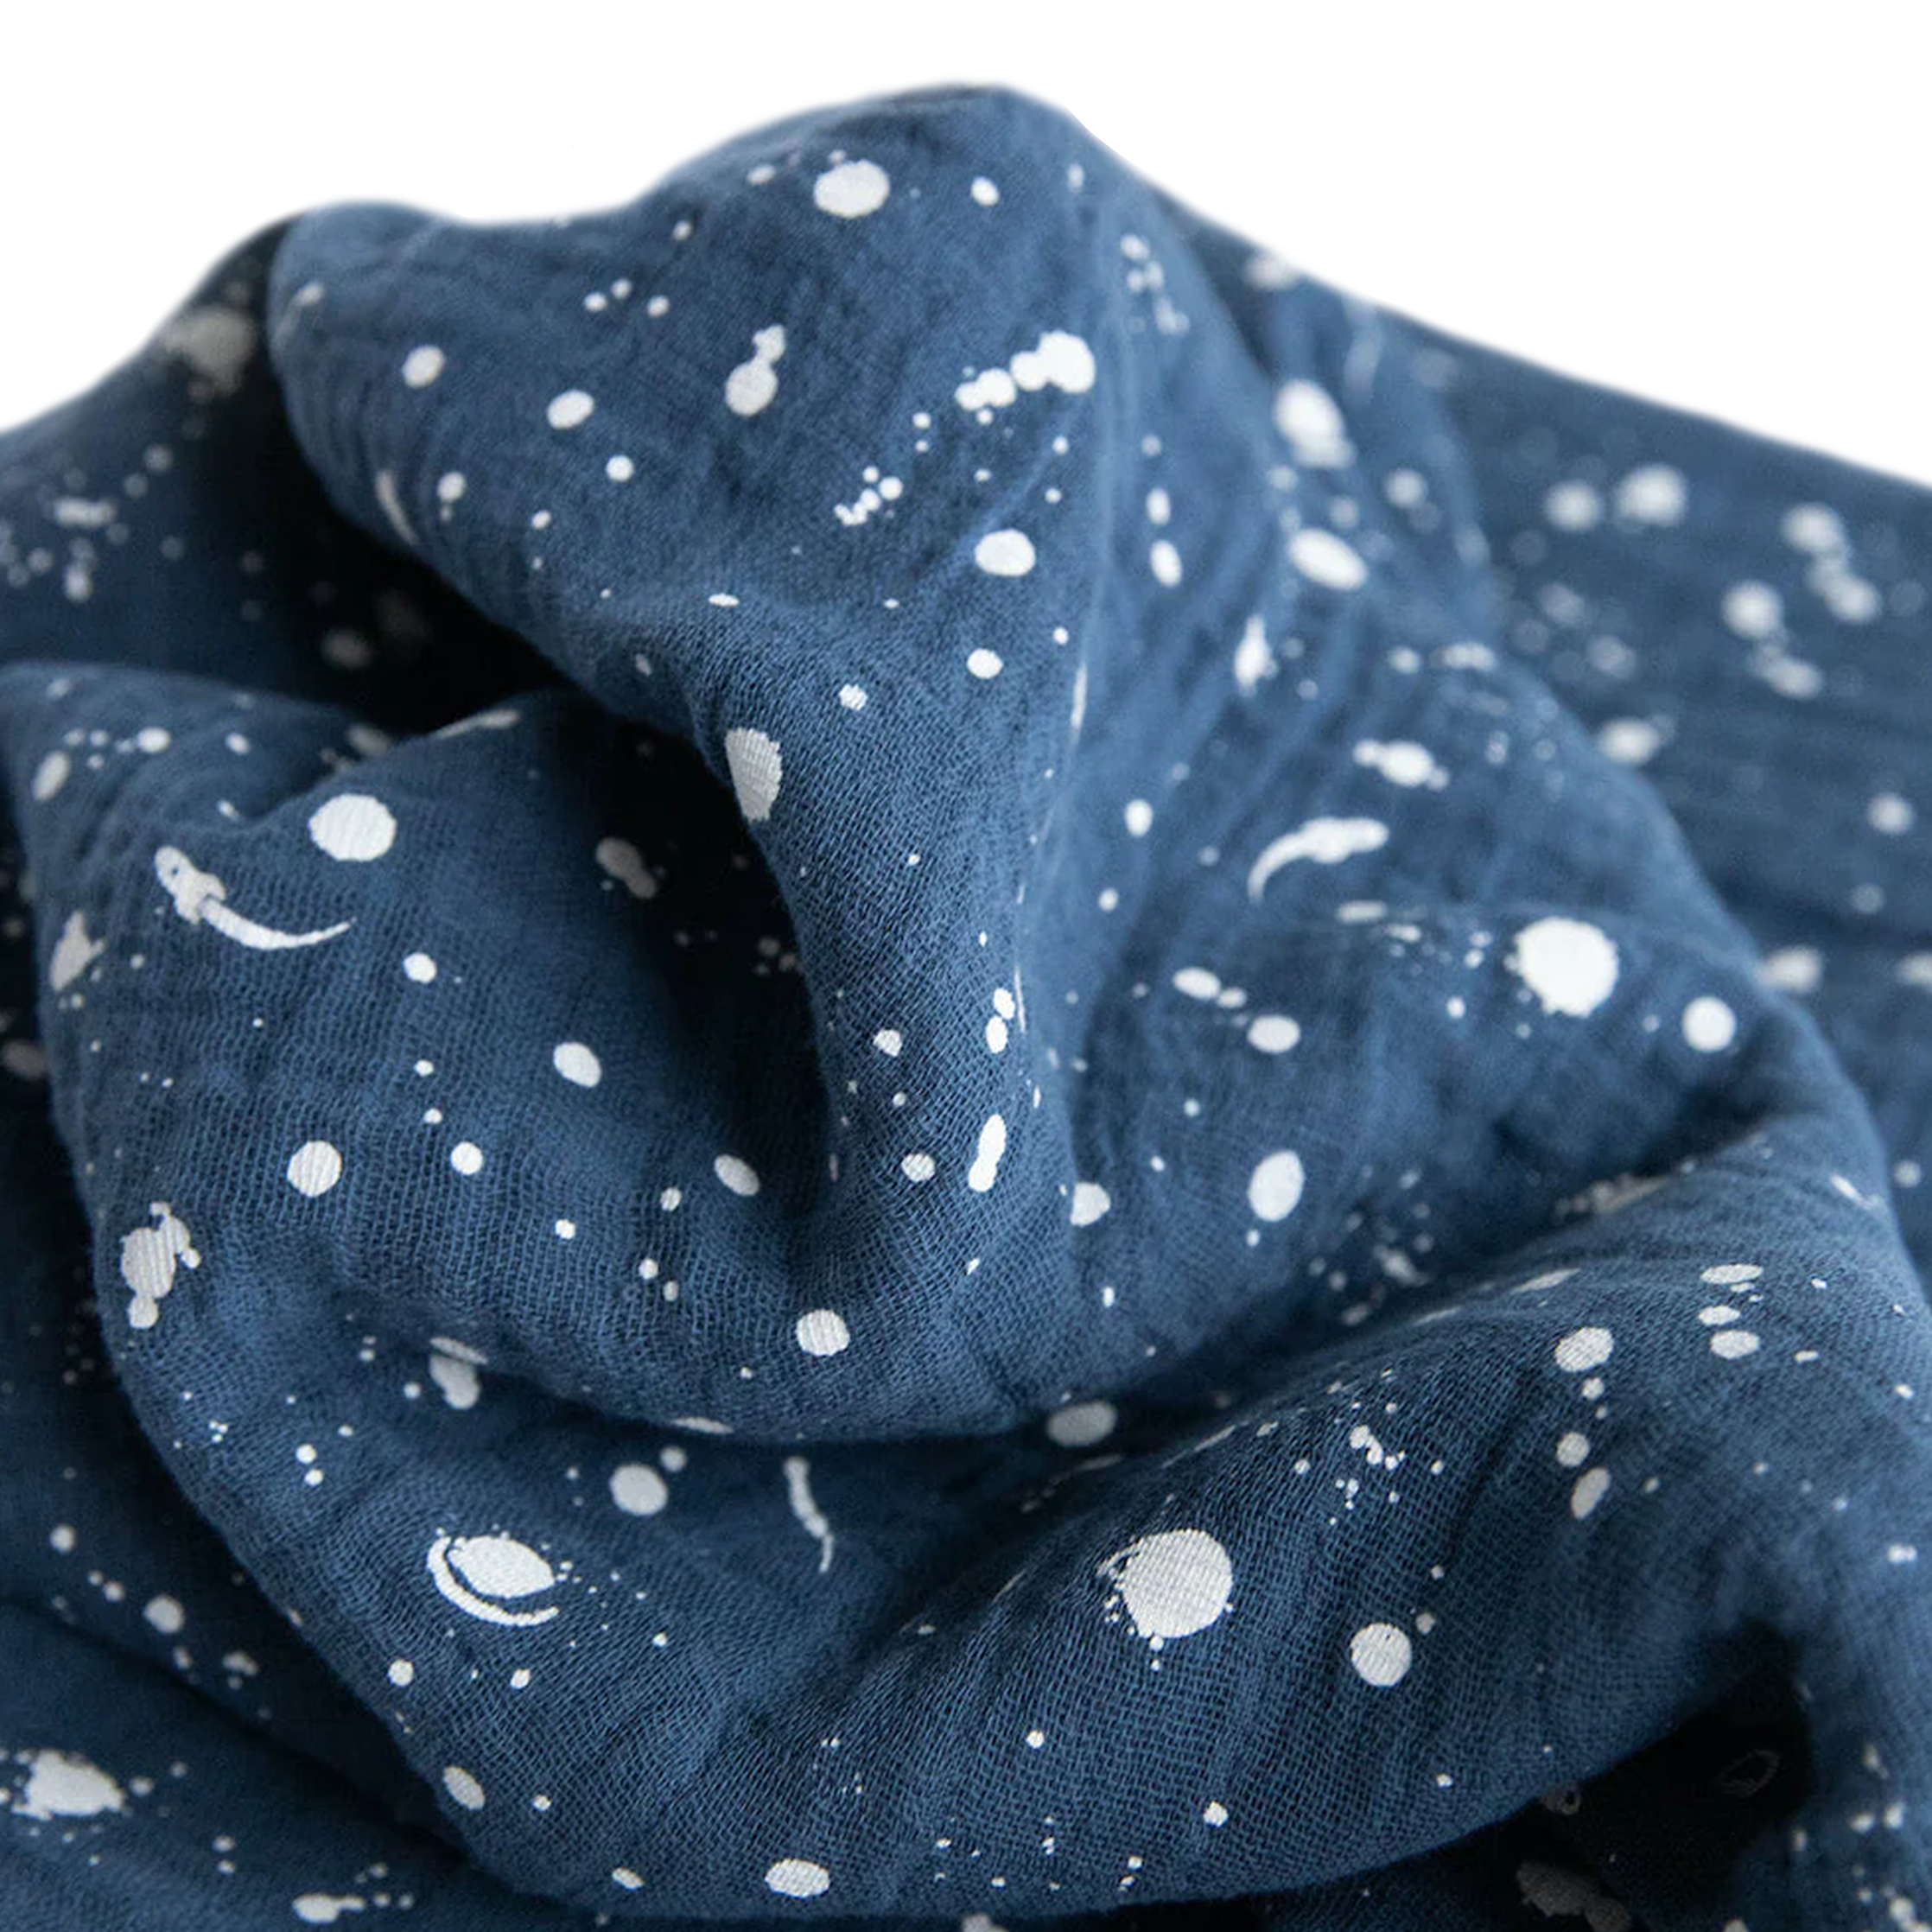 Cotton Muslin Swaddle Blanket - Star Sailing